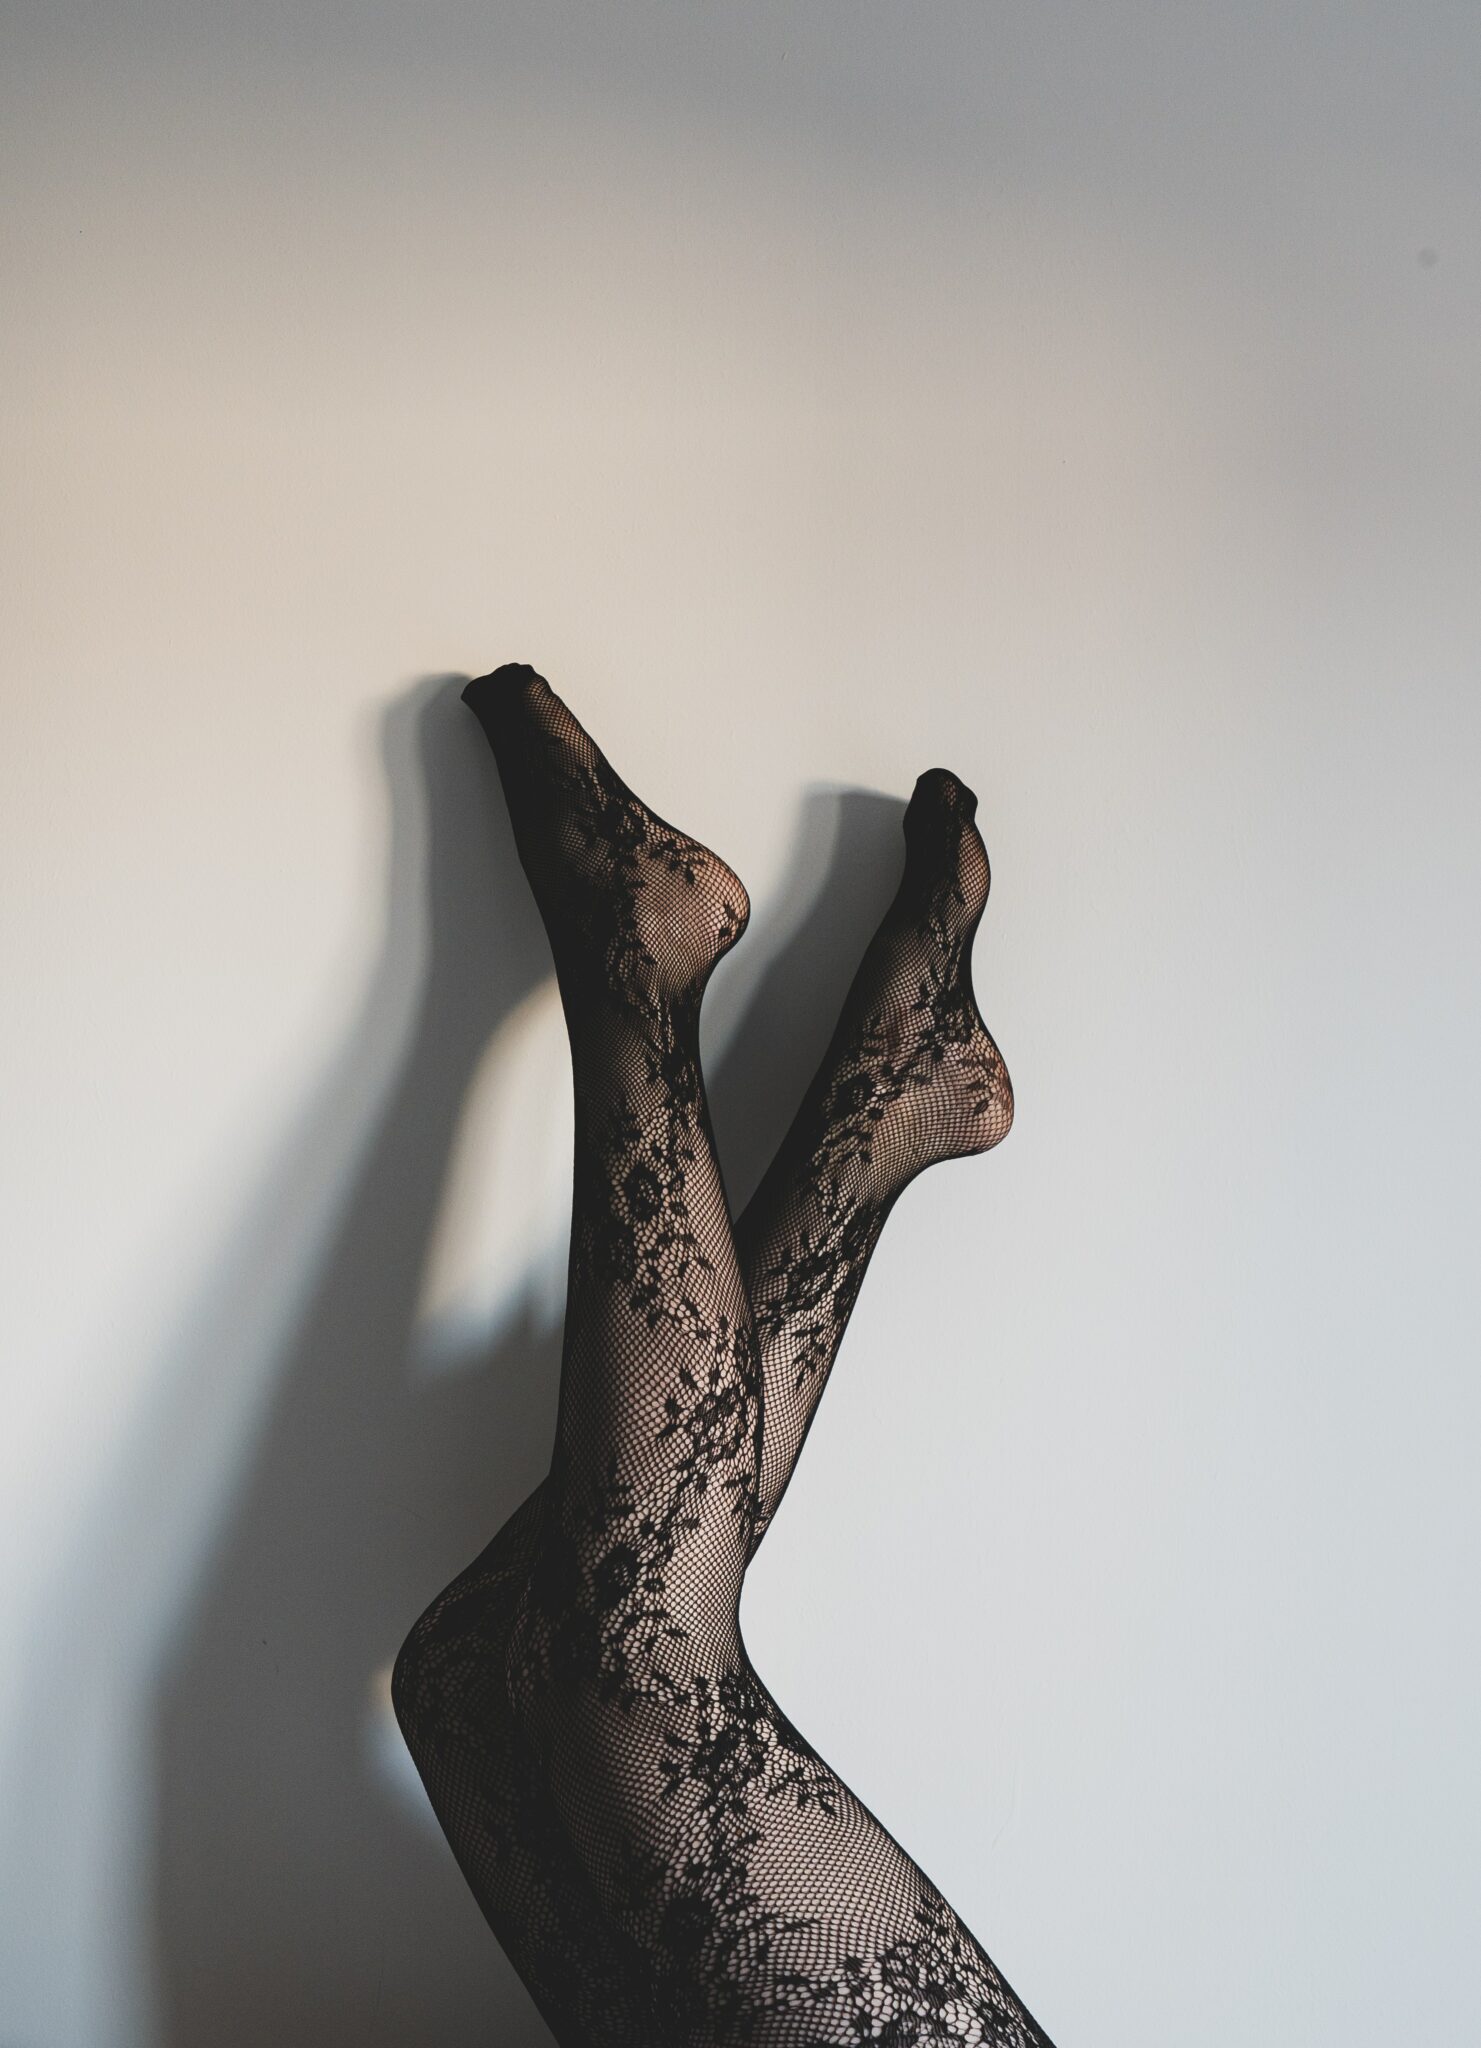 A woman's legs stretching up a wall in a pair of black lace stockings.